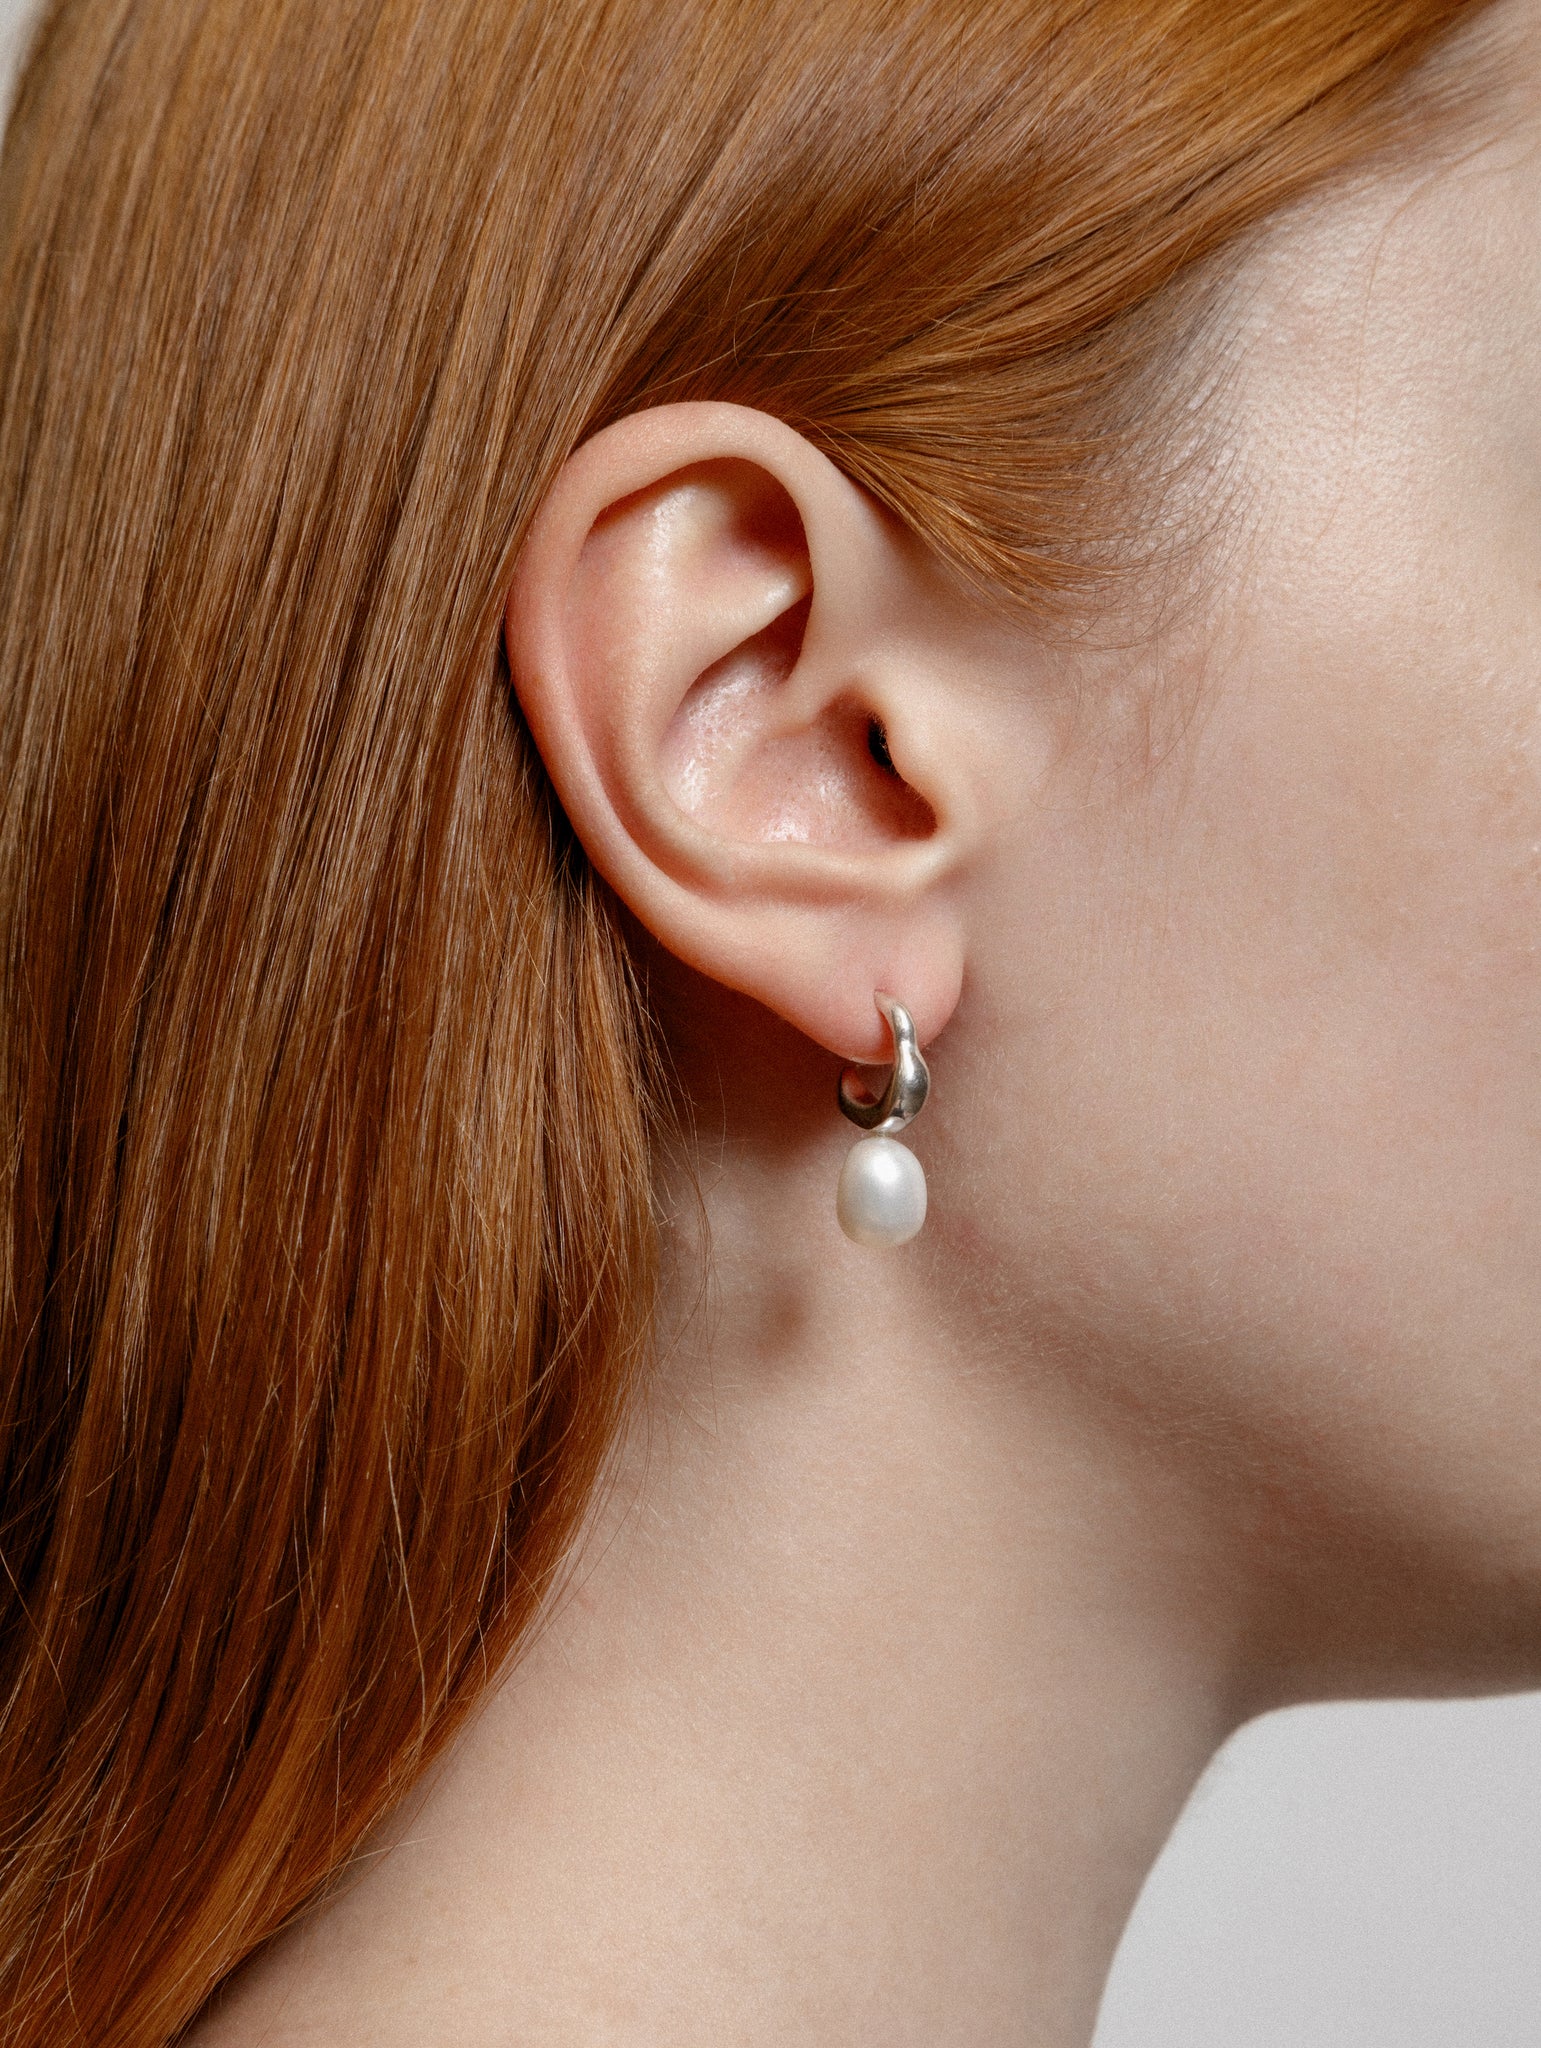 Wolf Circus Classic Pearl Hoop Stud in 925 Sterling Silver | Emmy Earring in Sterling Silver-Earrings-wolfcircus.com